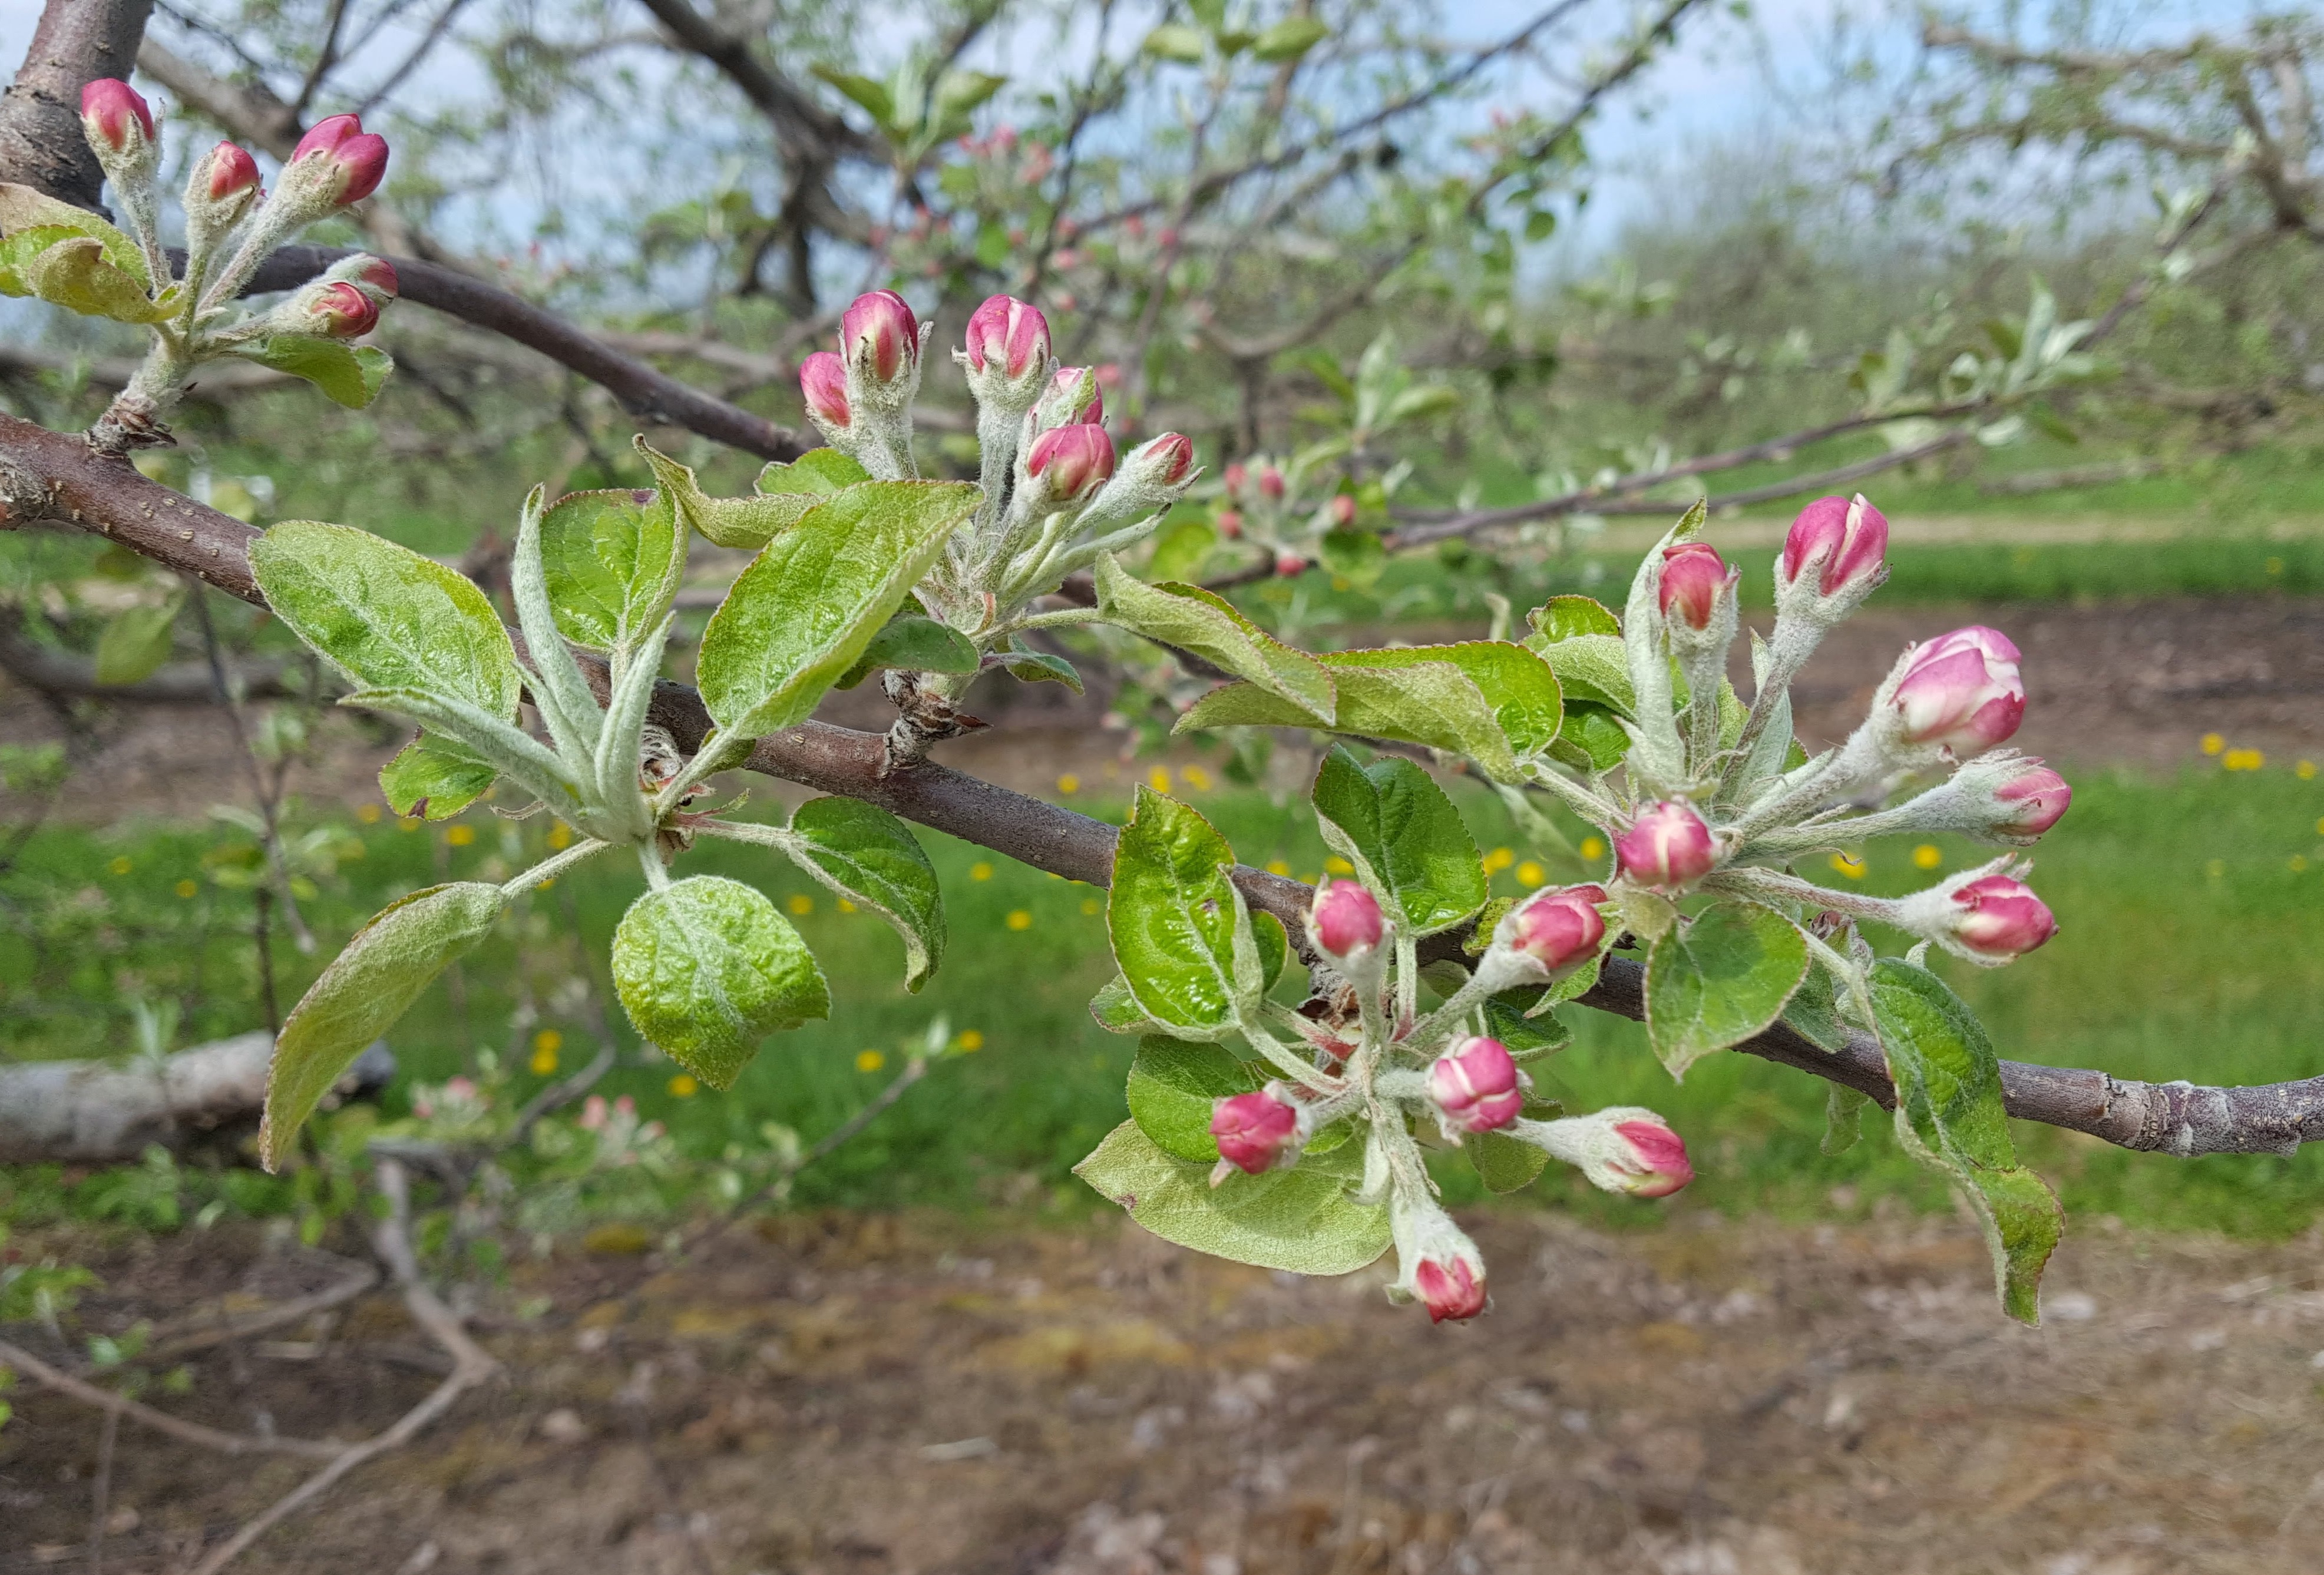 Apples are at full pink or open cluster and bloom is beginning